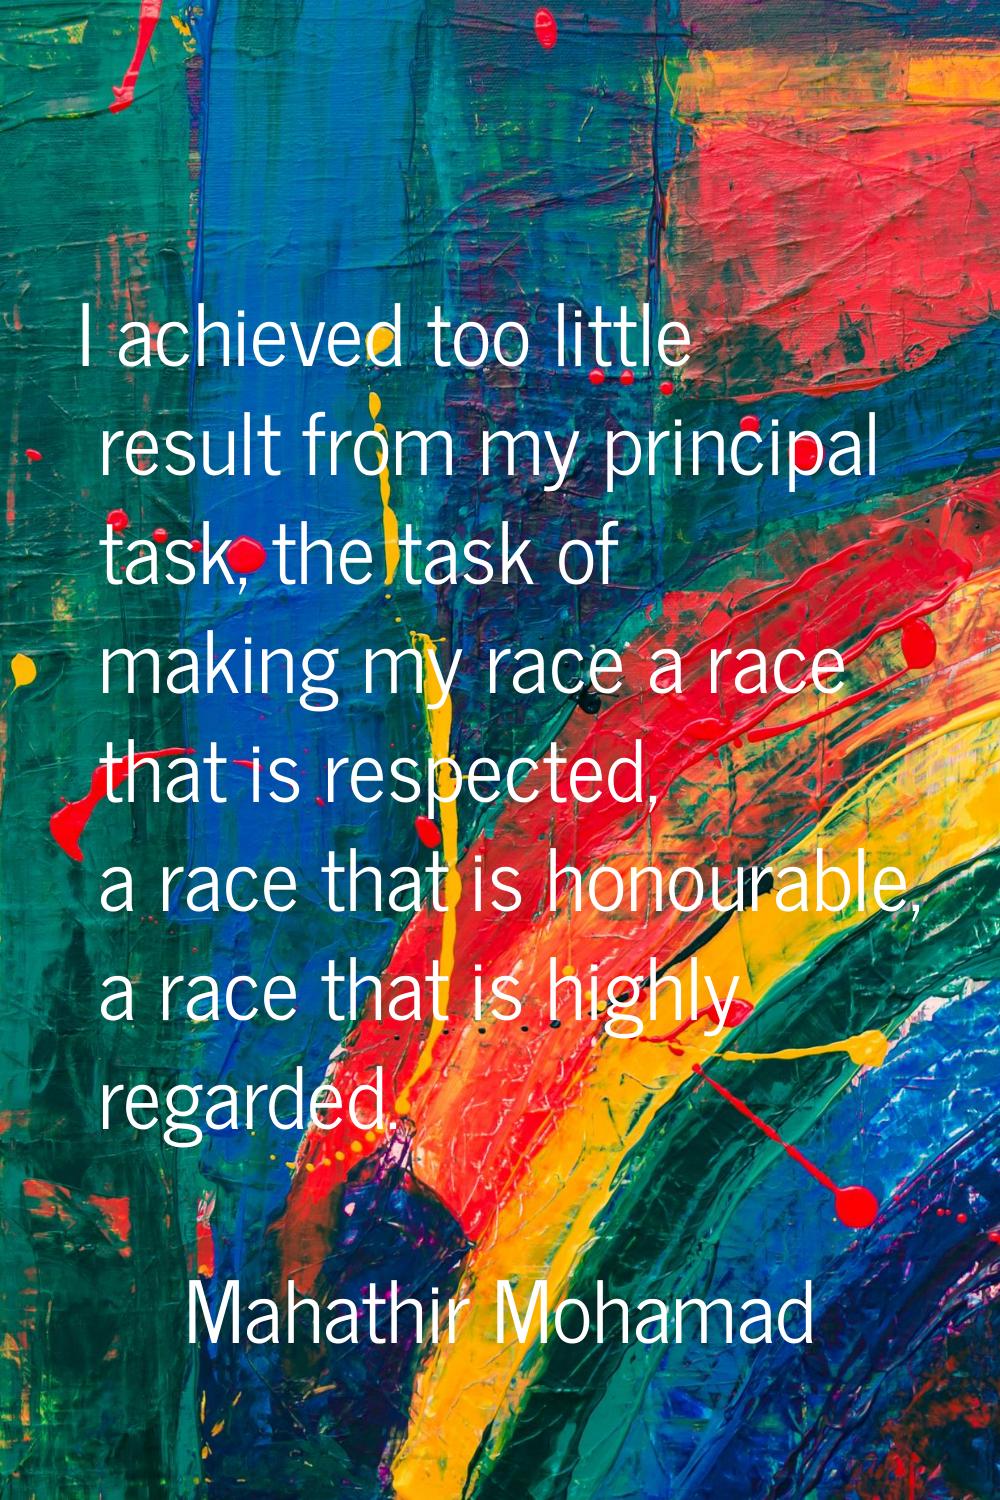 I achieved too little result from my principal task, the task of making my race a race that is resp